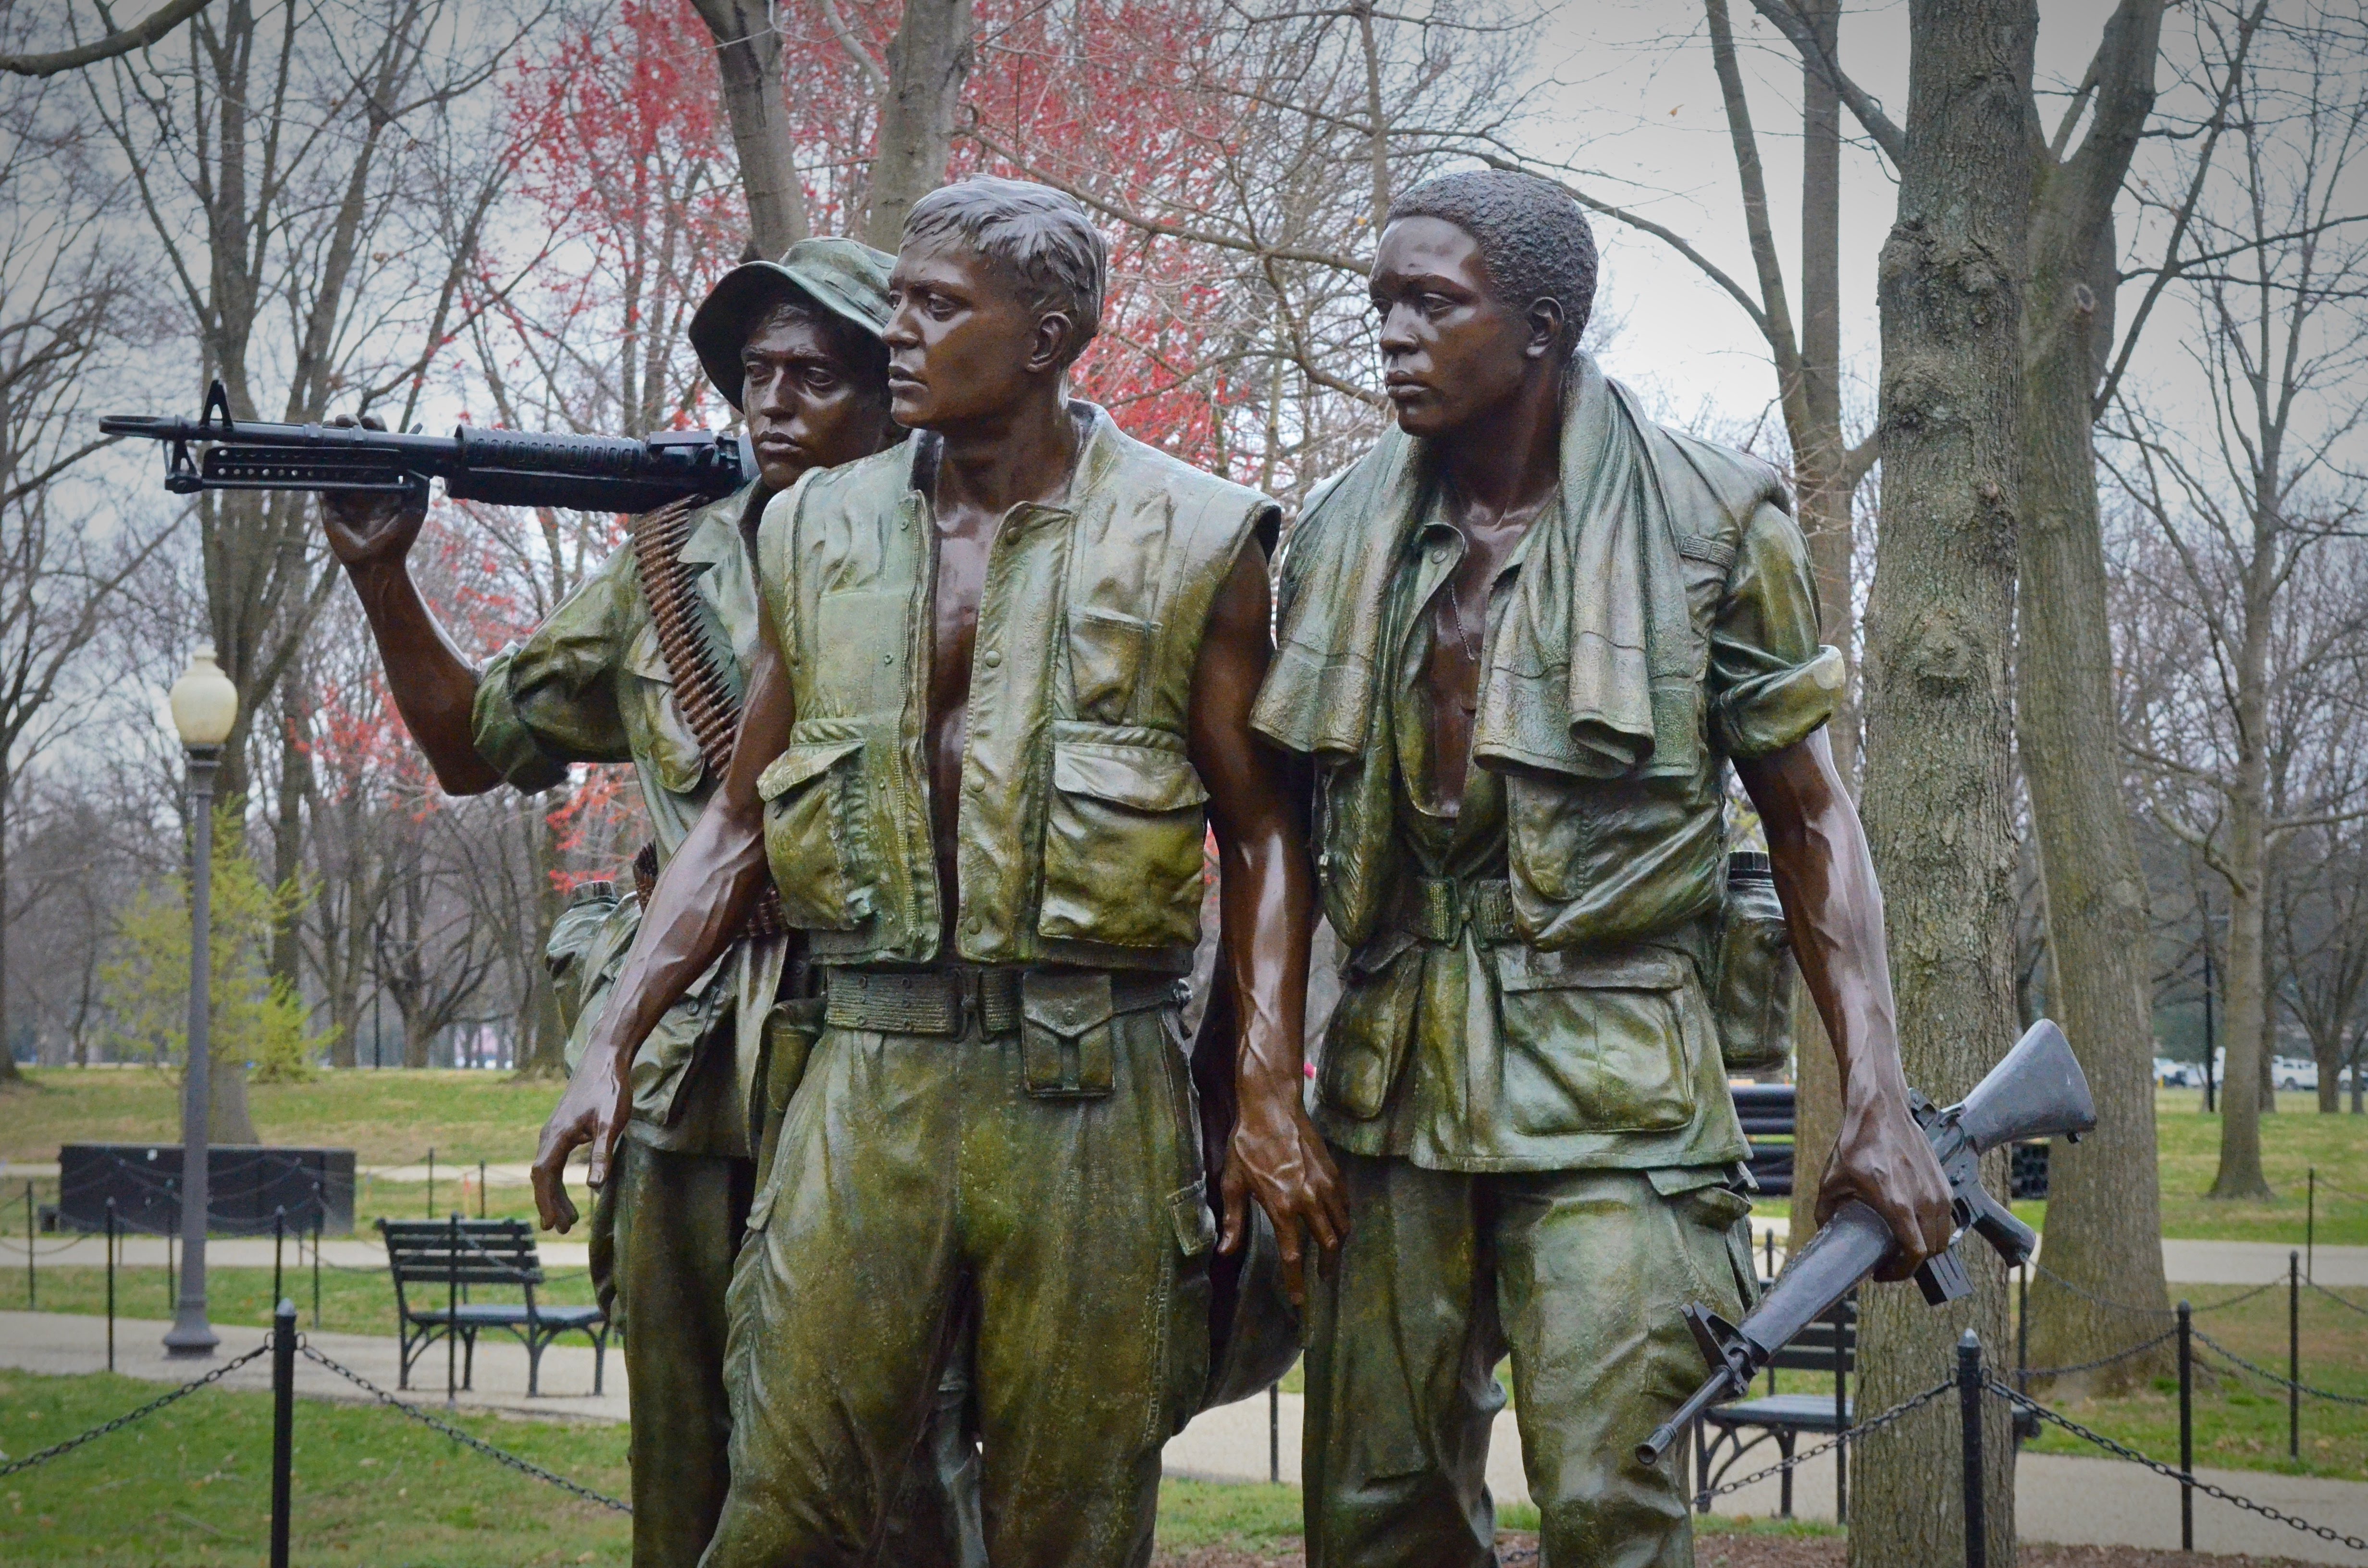 monument to men who fought in vietnam, washington, washington dc, washington dc travel, dc travel, dc blog, washington dc blog, dc travel blog, washington dc travel blog, what to see in dc, things to see in dc, dc travel photography, washington dc travel photography, memorials and monuments, washington dc monuments, dc monuments, vietnam, vietnam war, vietnam war memorial, vietnam war memorial in dc,